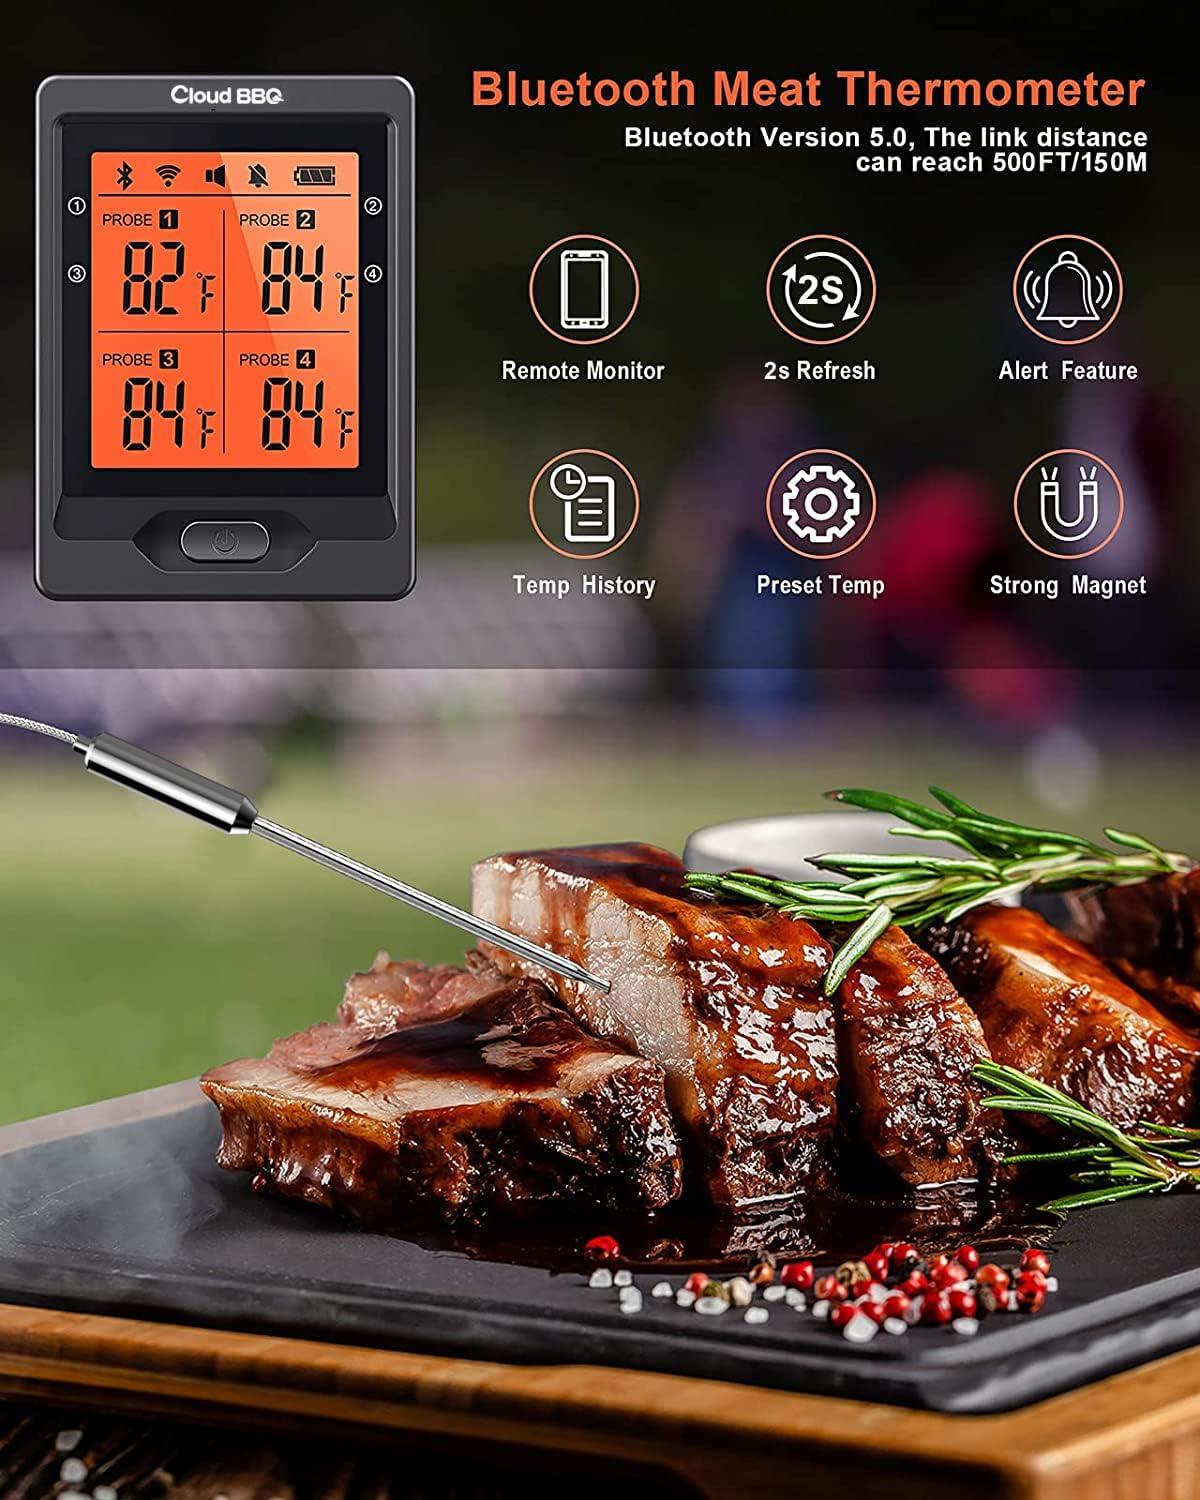 Cloud BBQ 500FT Wireless Meat Thermometer, Smart Rechargeable BBQ Thermometer with Four Probes, Bluetooth Meat Thermometer for Somker, Oven,Grilling, Cooking Turkey Fish Beef (FS-66) - CookCave